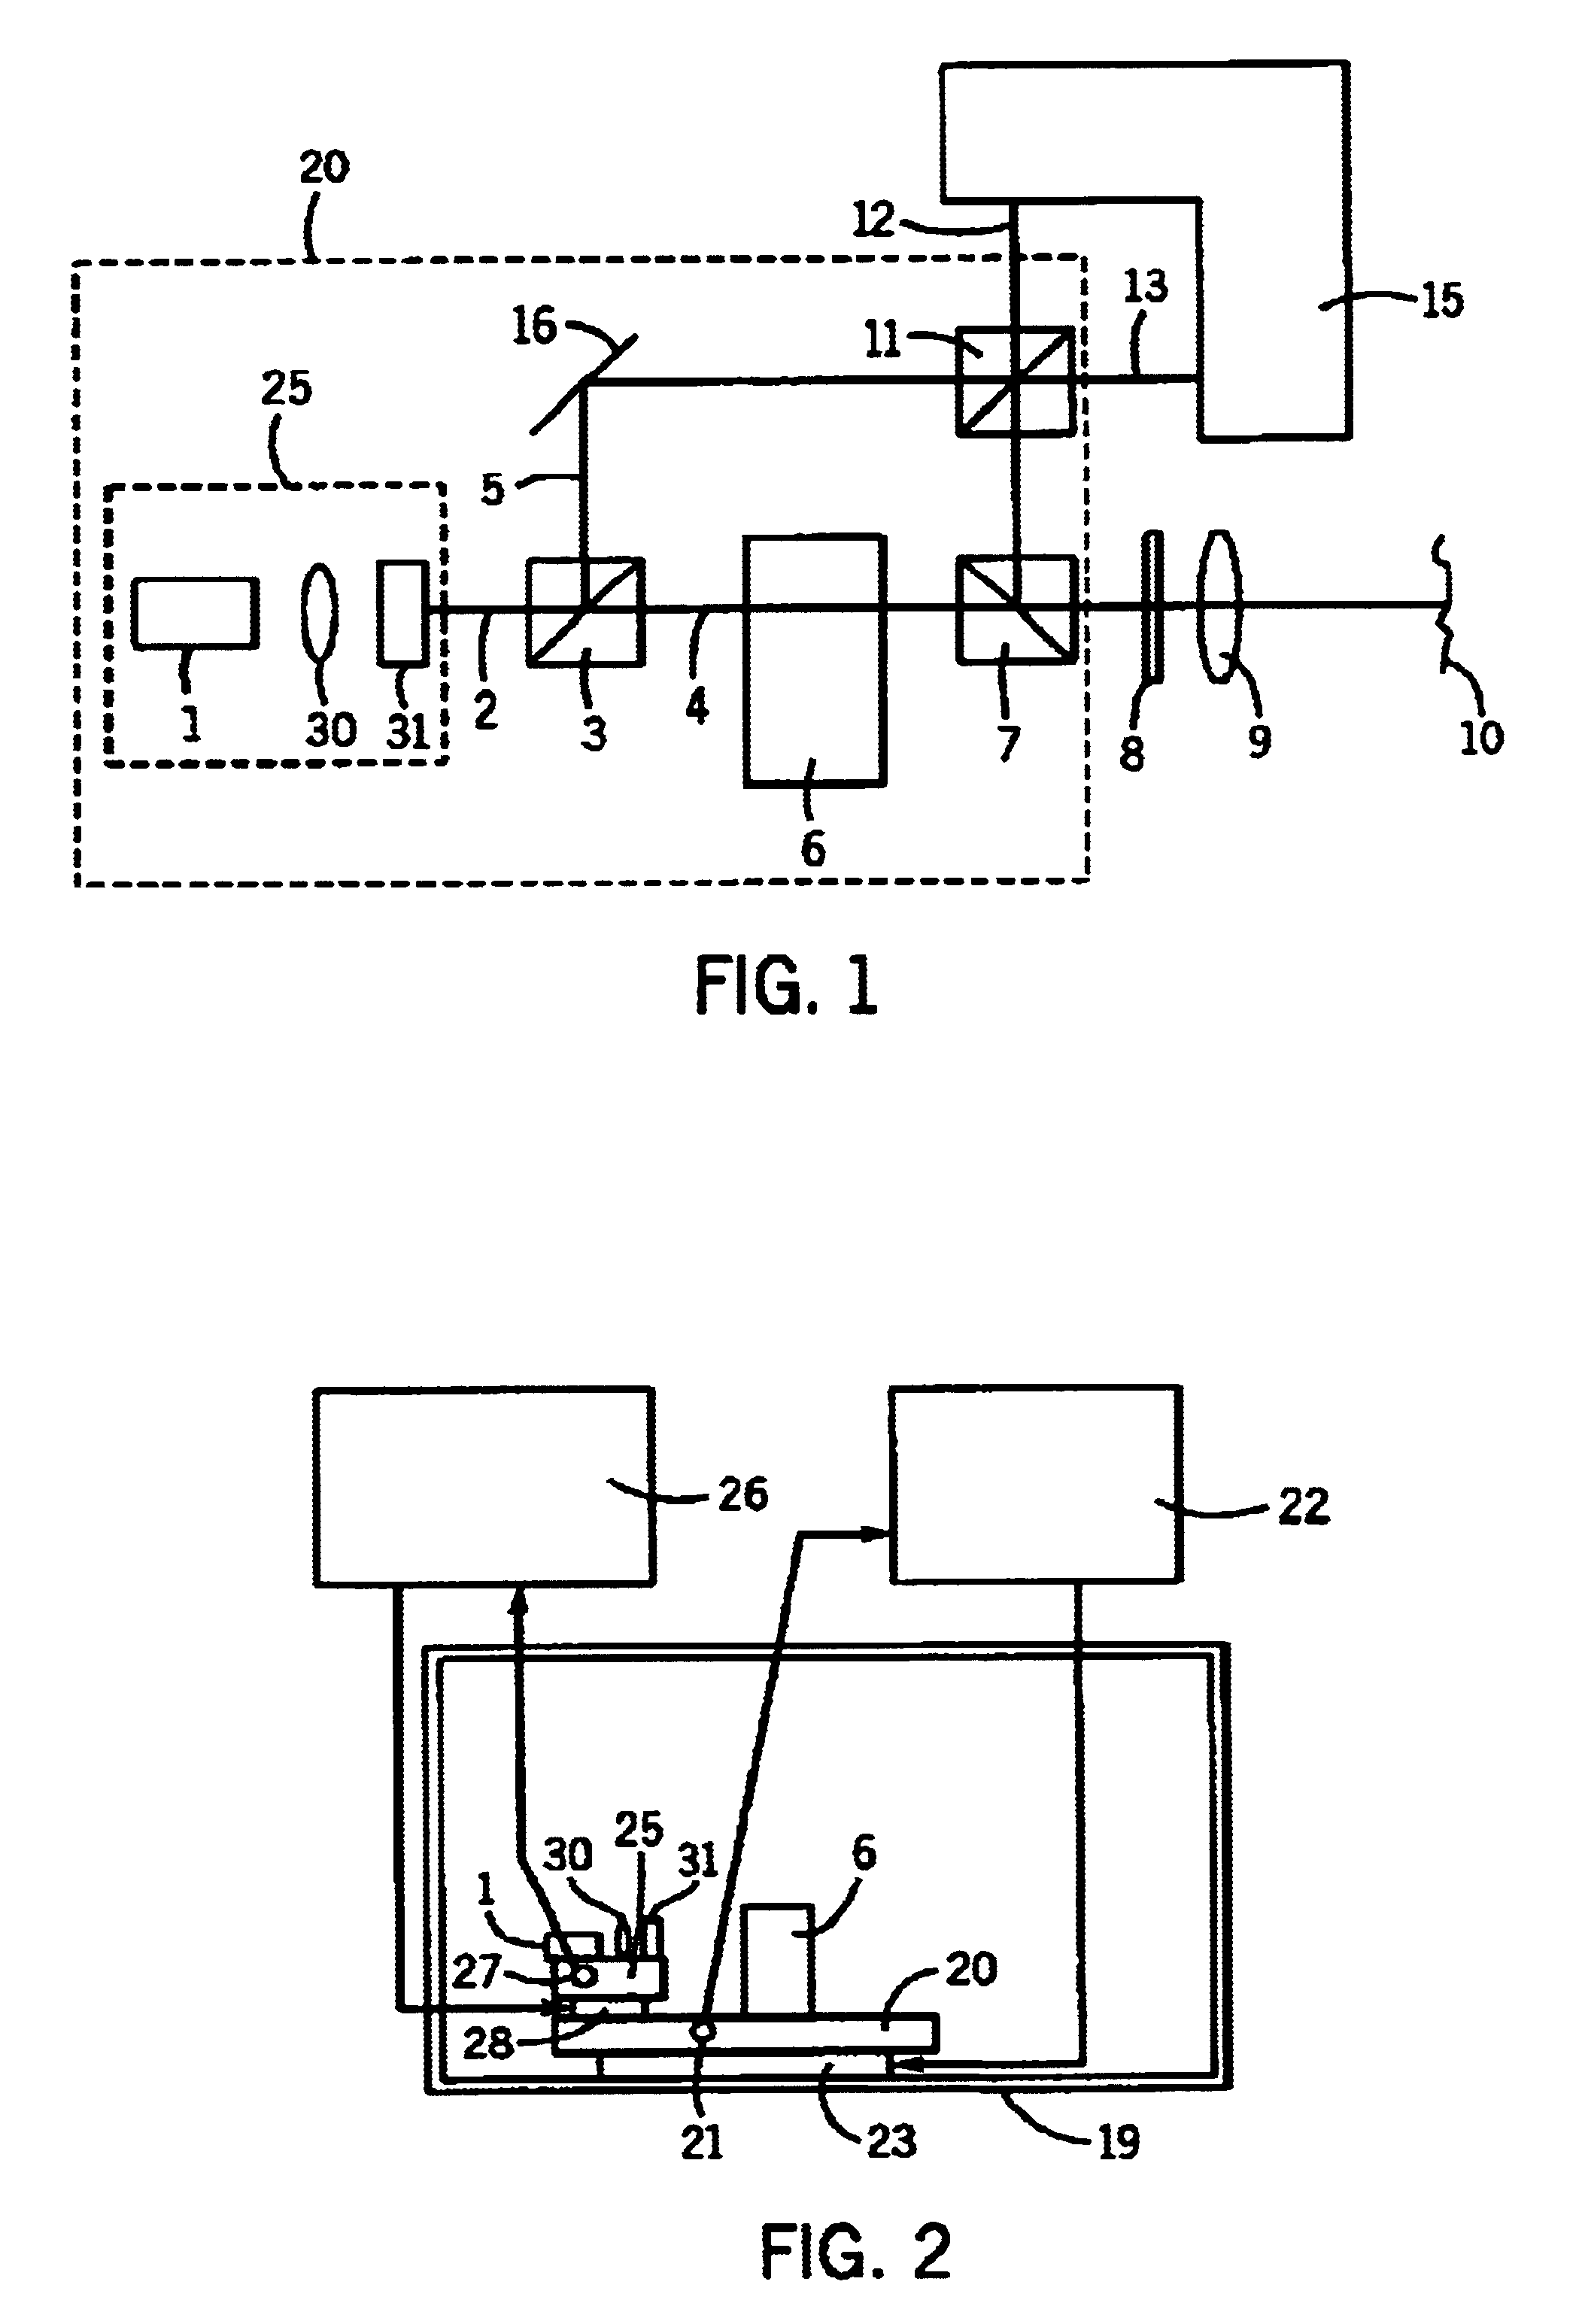 Device for the non-contacting measurement of an object to be measured, particularly for distance and/or vibration measurement